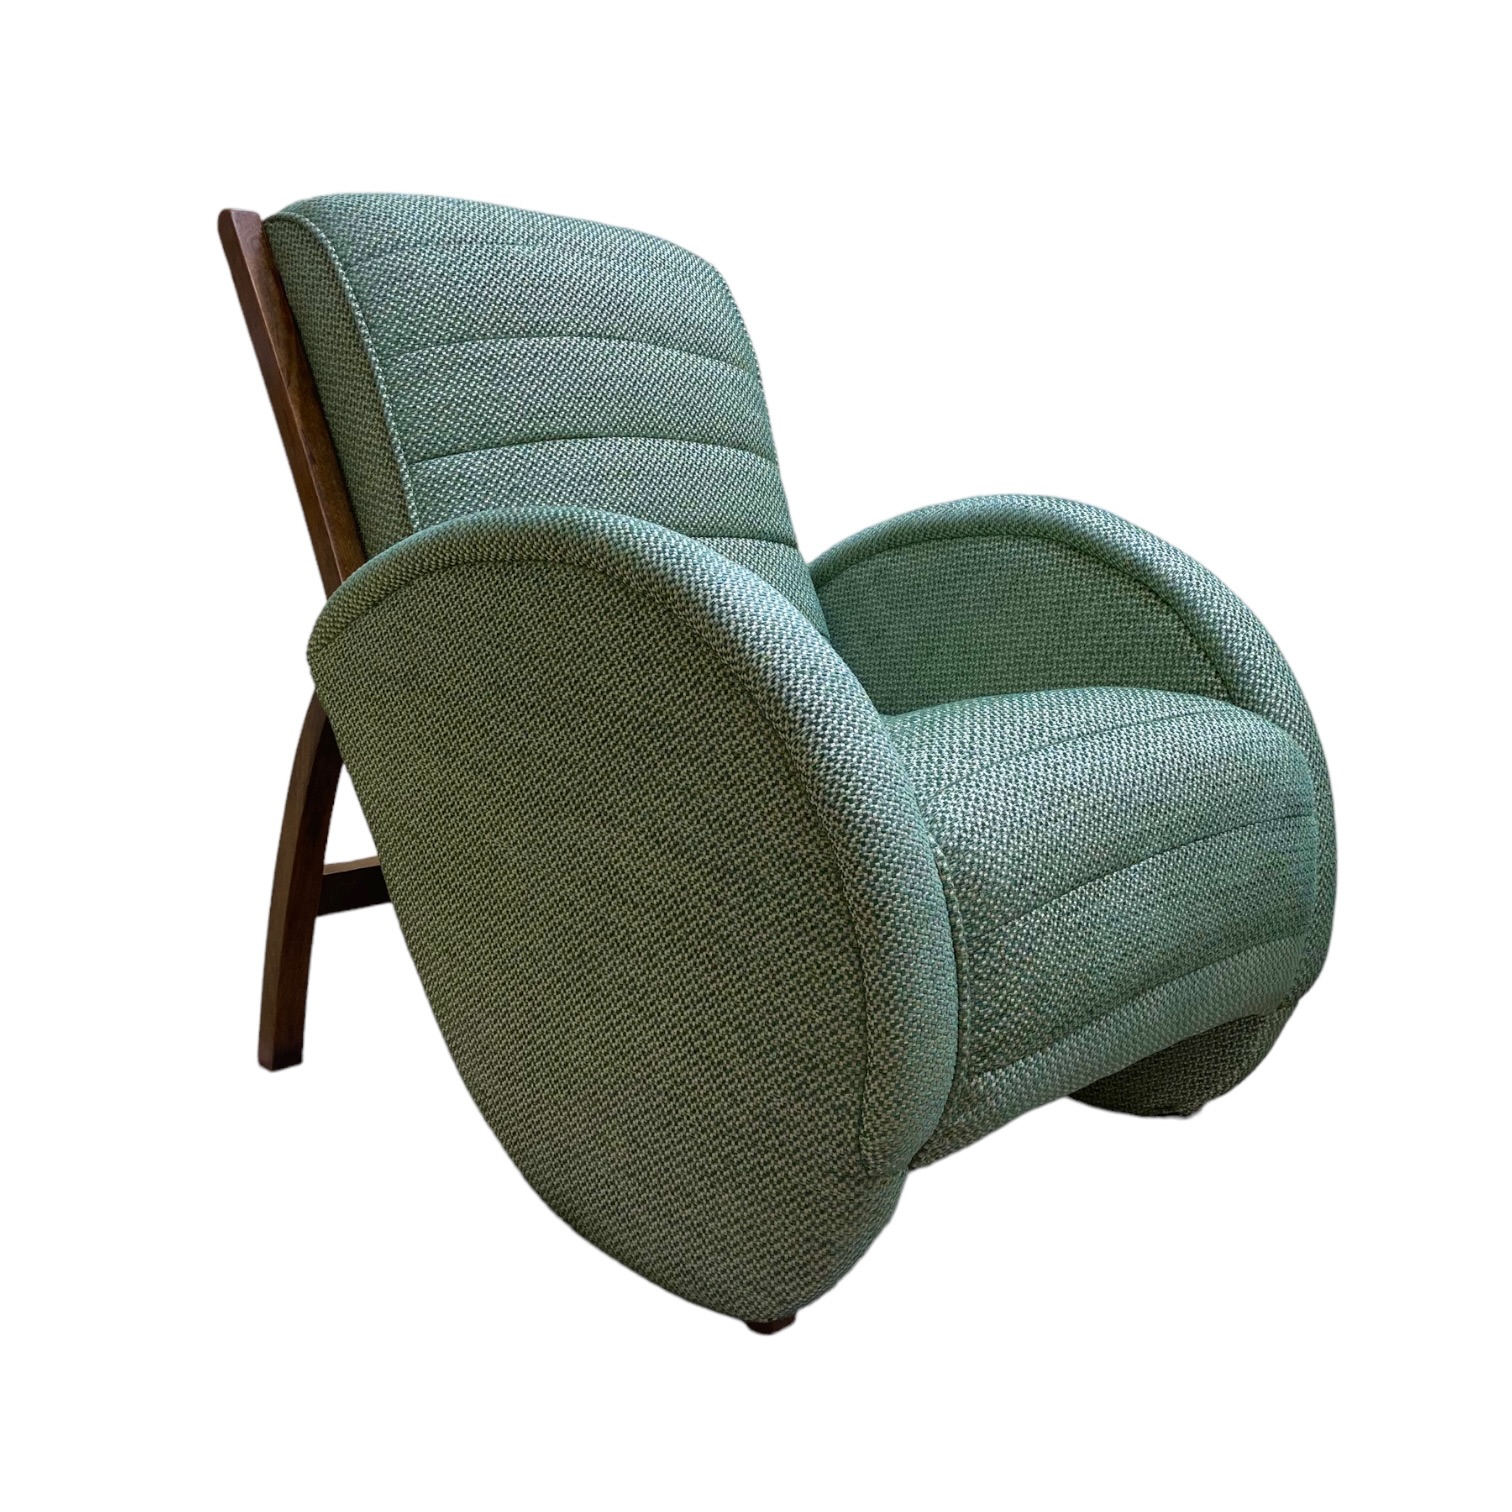 Art Deco Armchair By Suparest Circa 1930 Fully Restored And Upholstered In Luxurious Chenille Fabric By Marvick